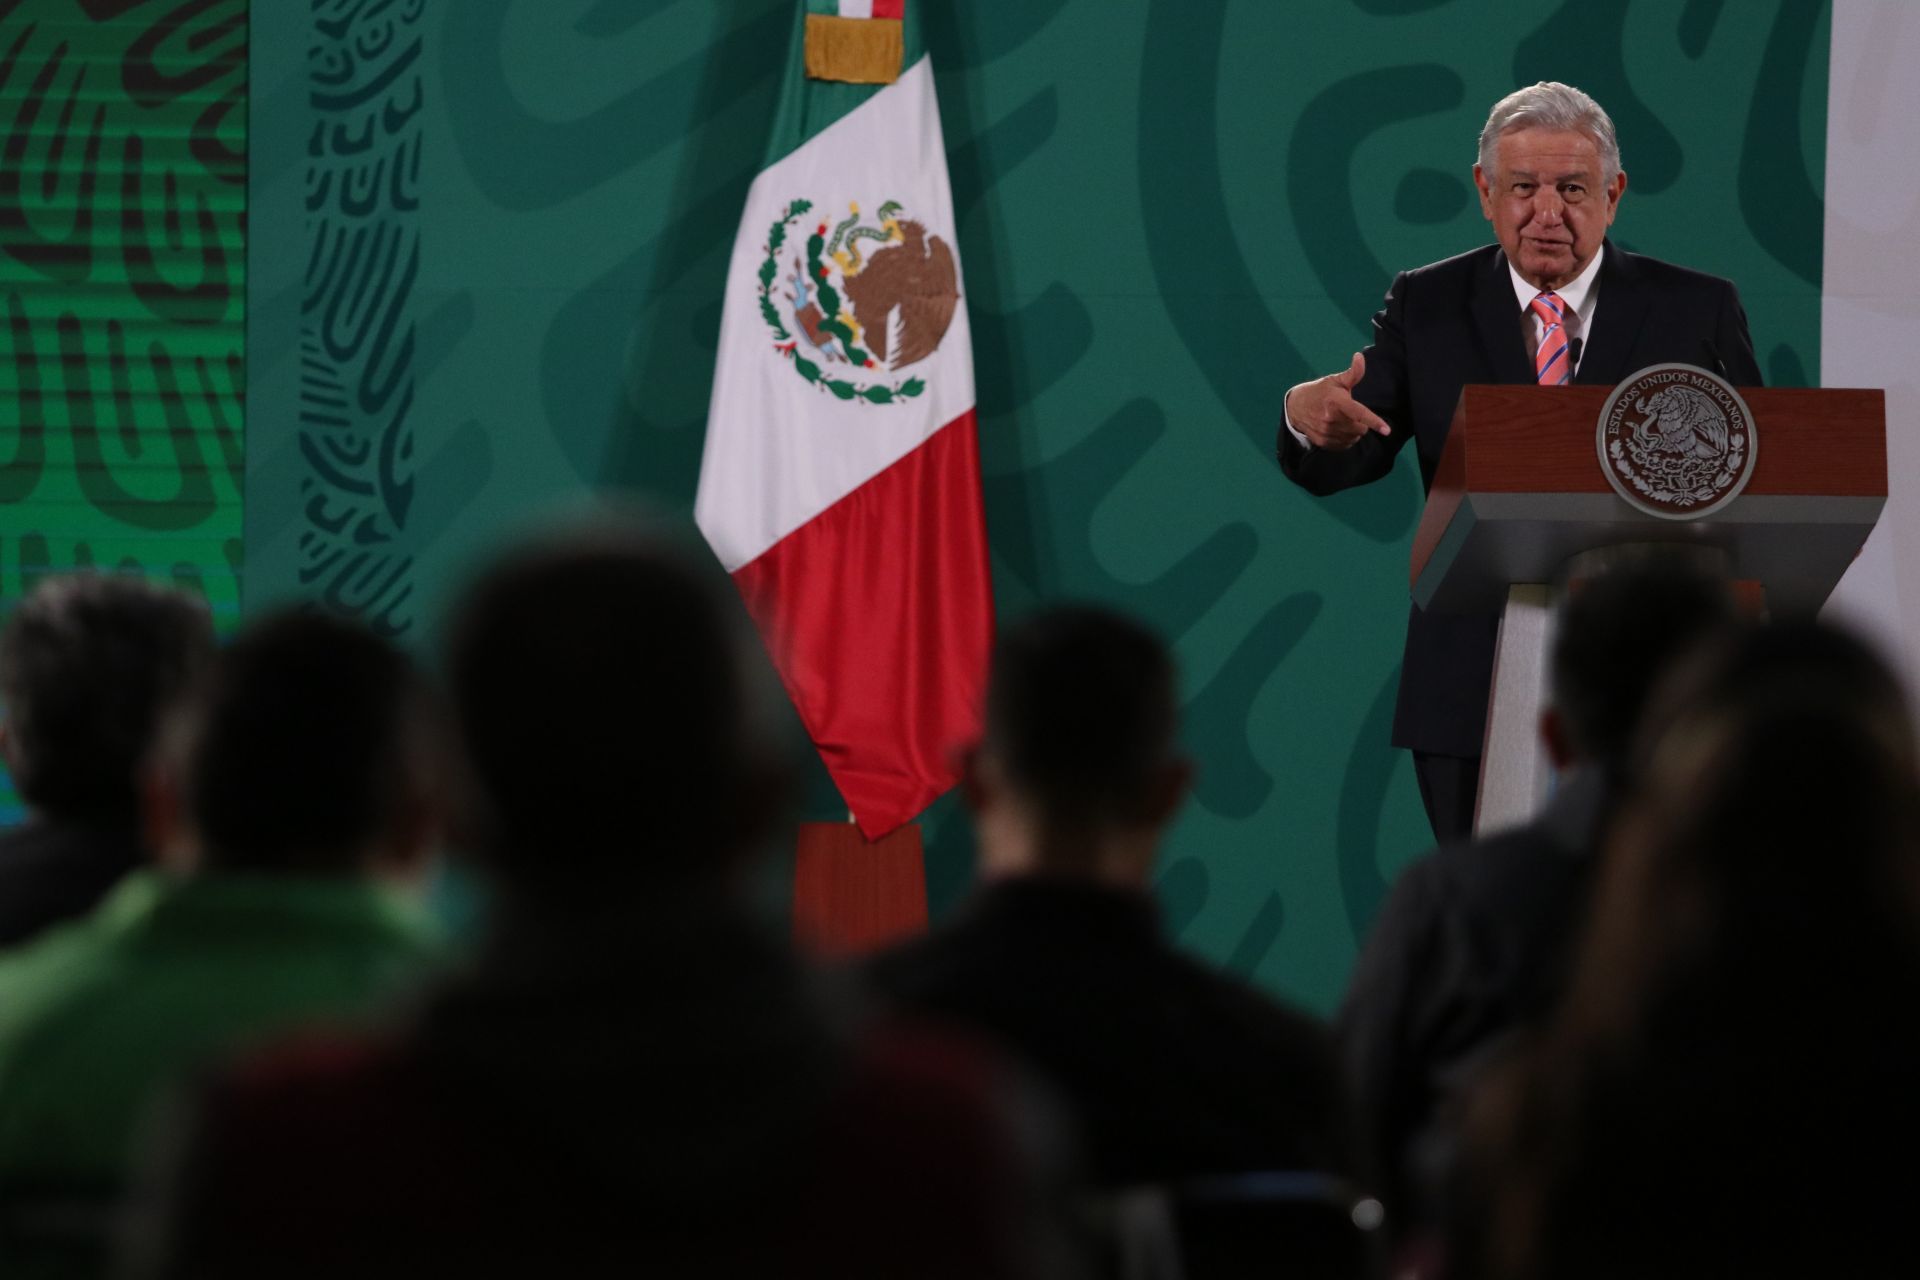 AMLO accuses that Article 19 belongs to the conservative movement